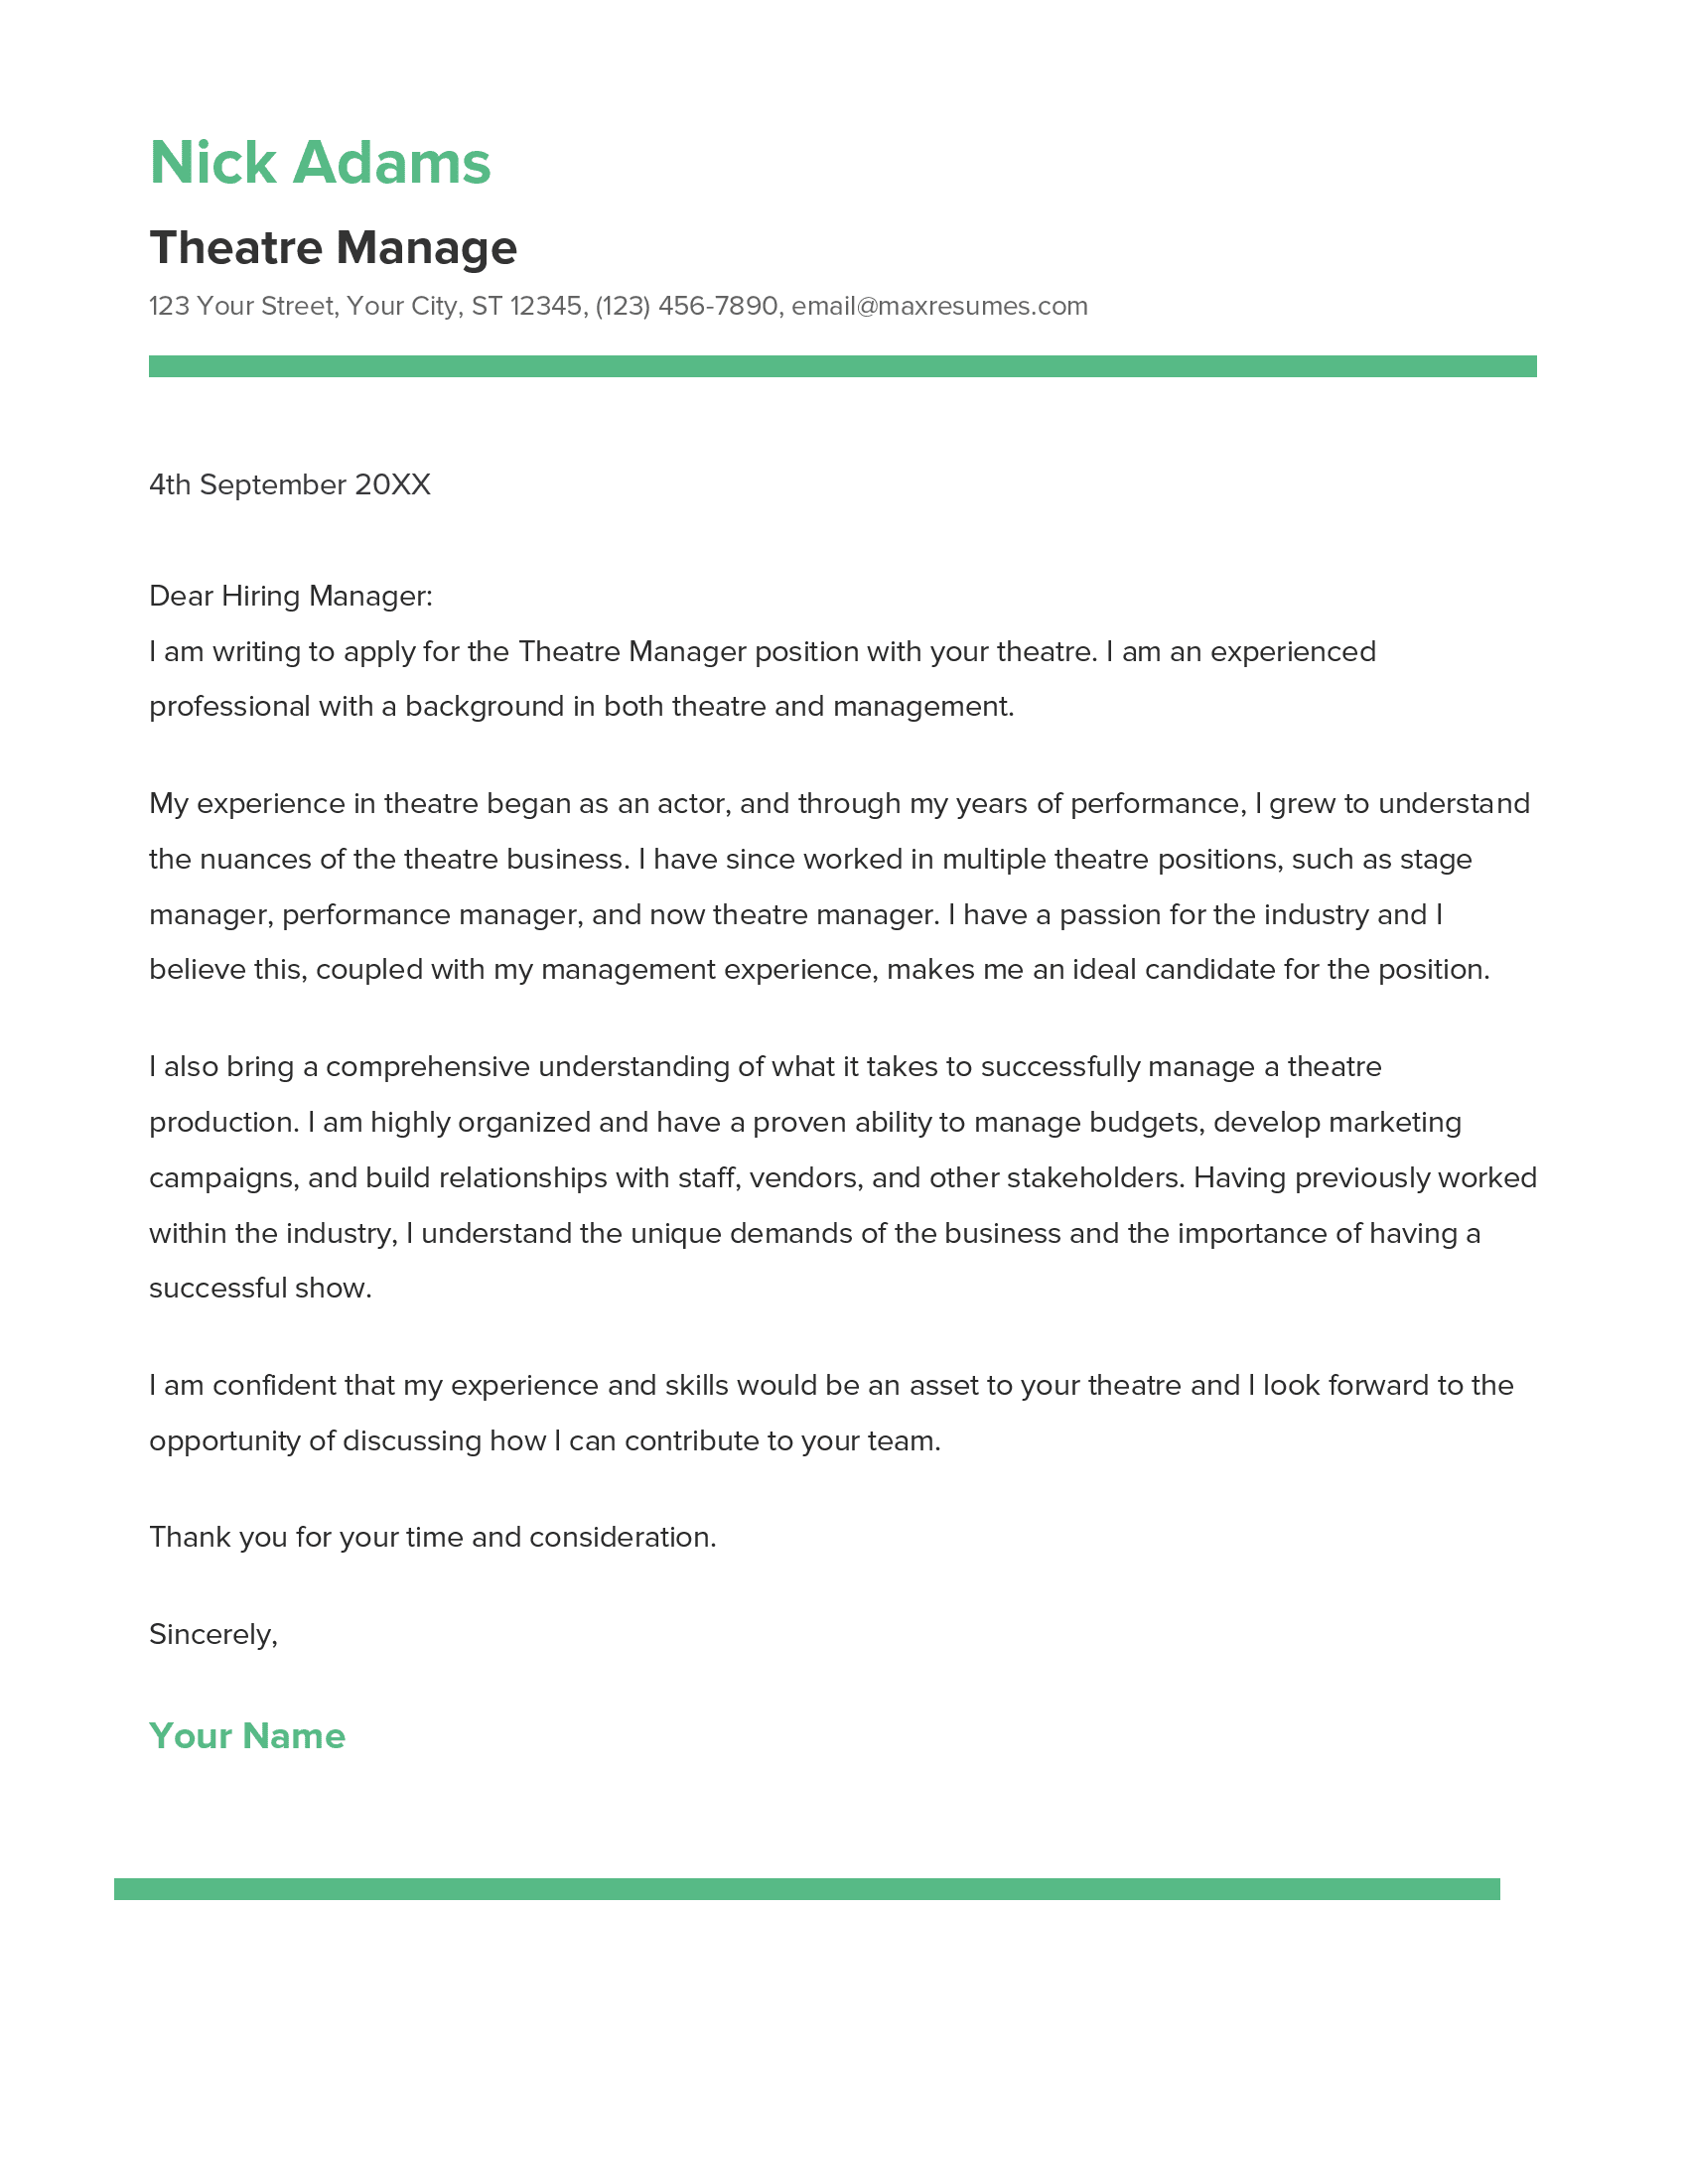 Theatre Manager Cover Letter Example